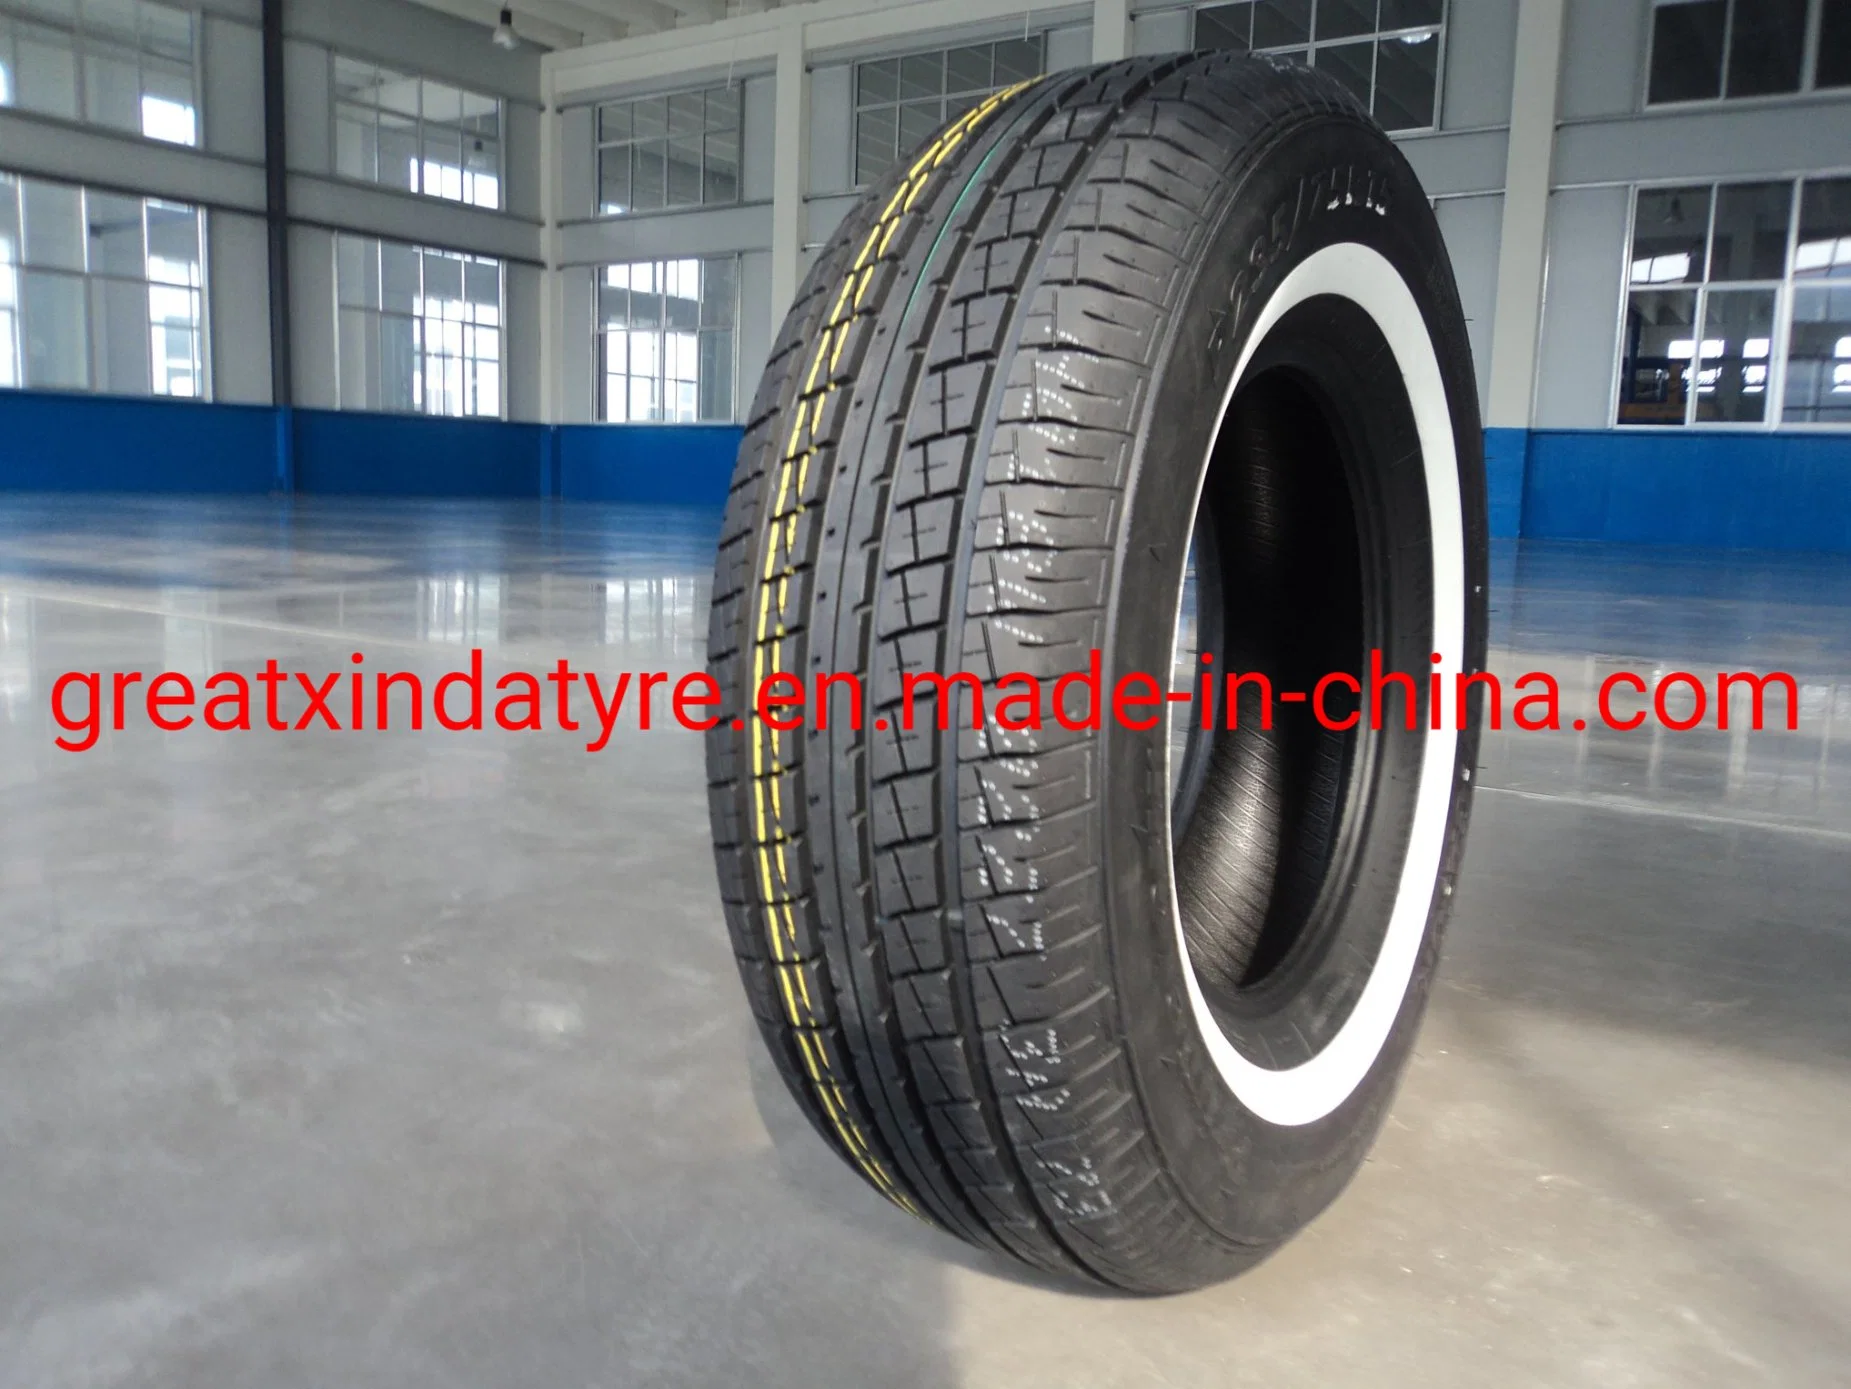 Made in China 265/70r17 285/60r18 Highway PCR Racing Tyre Roadking Brand